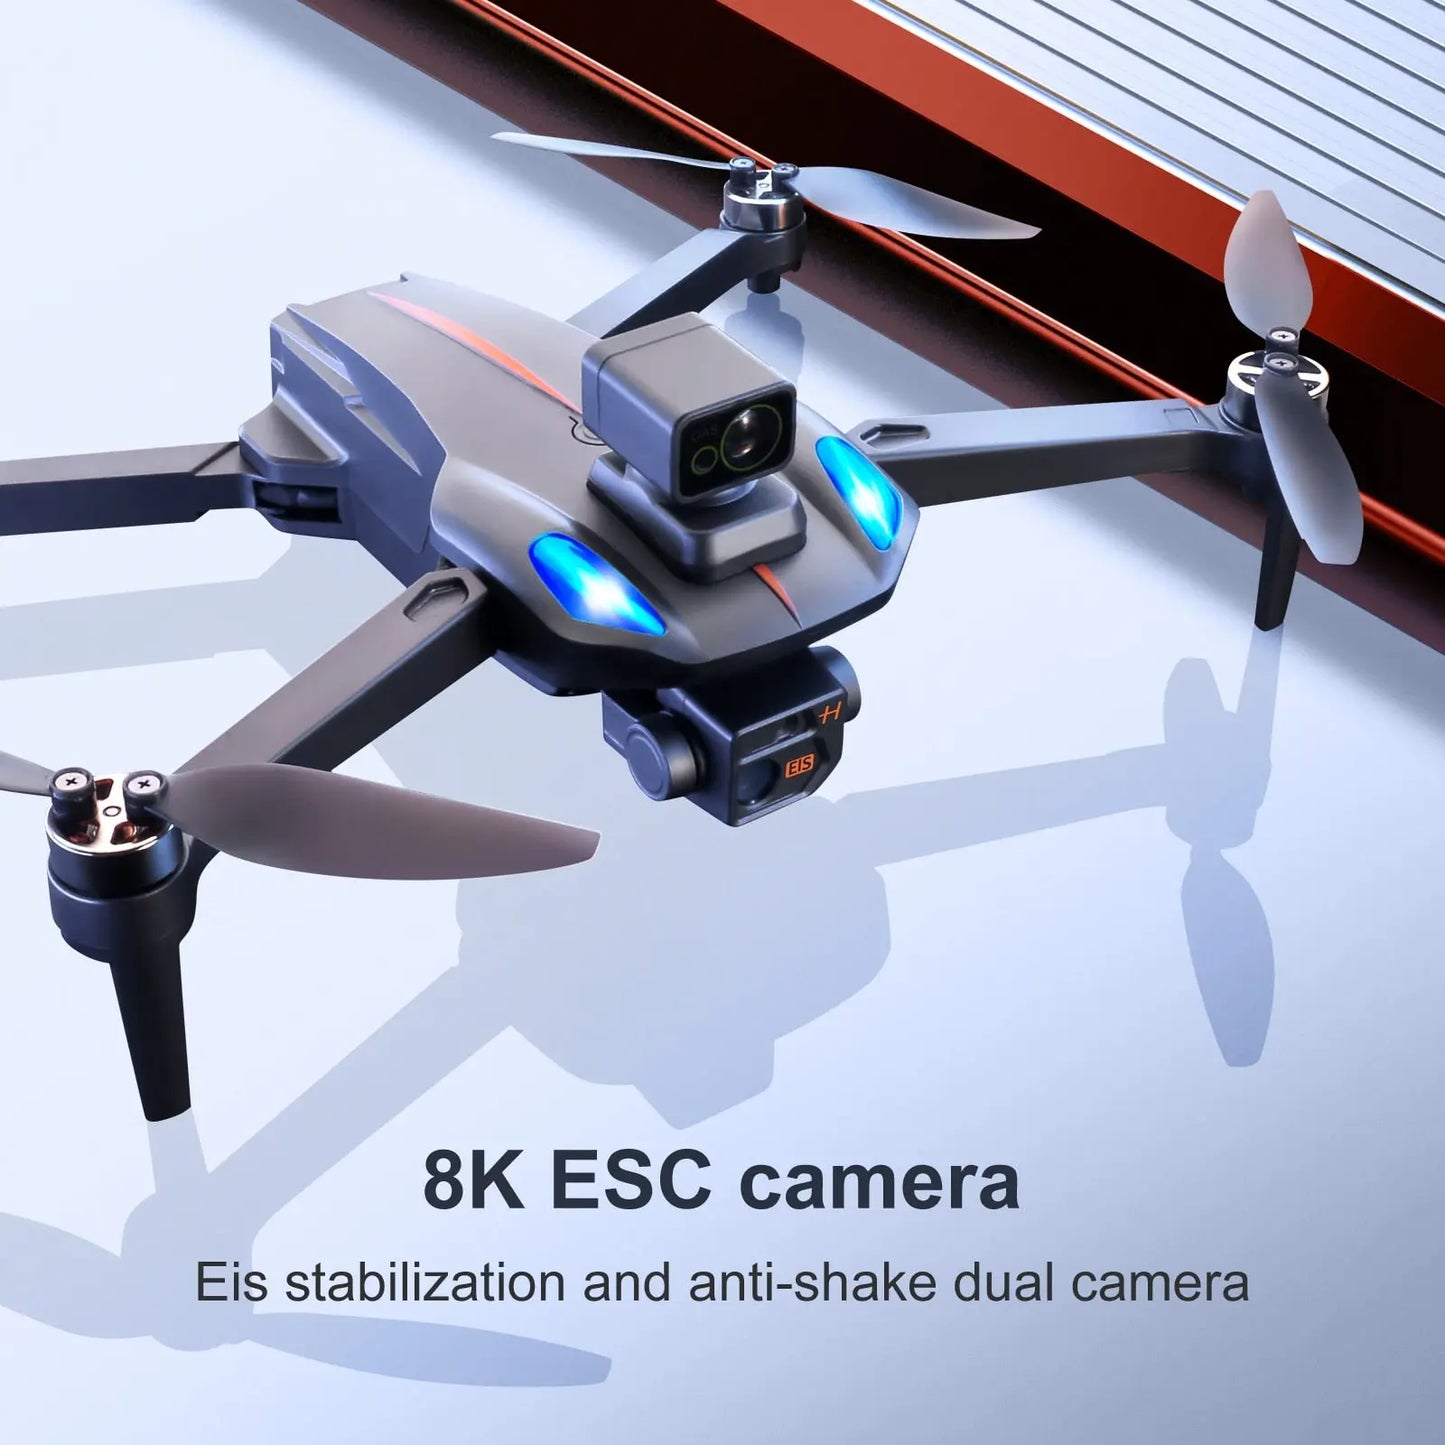 Xkj K911 Max Gps Drone 4k Professional Obstacle Avoidance 8k Dual hd  Toys & Games > Toys > Remote Control Toys > Remote Control Planes 407.49 EZYSELLA SHOP